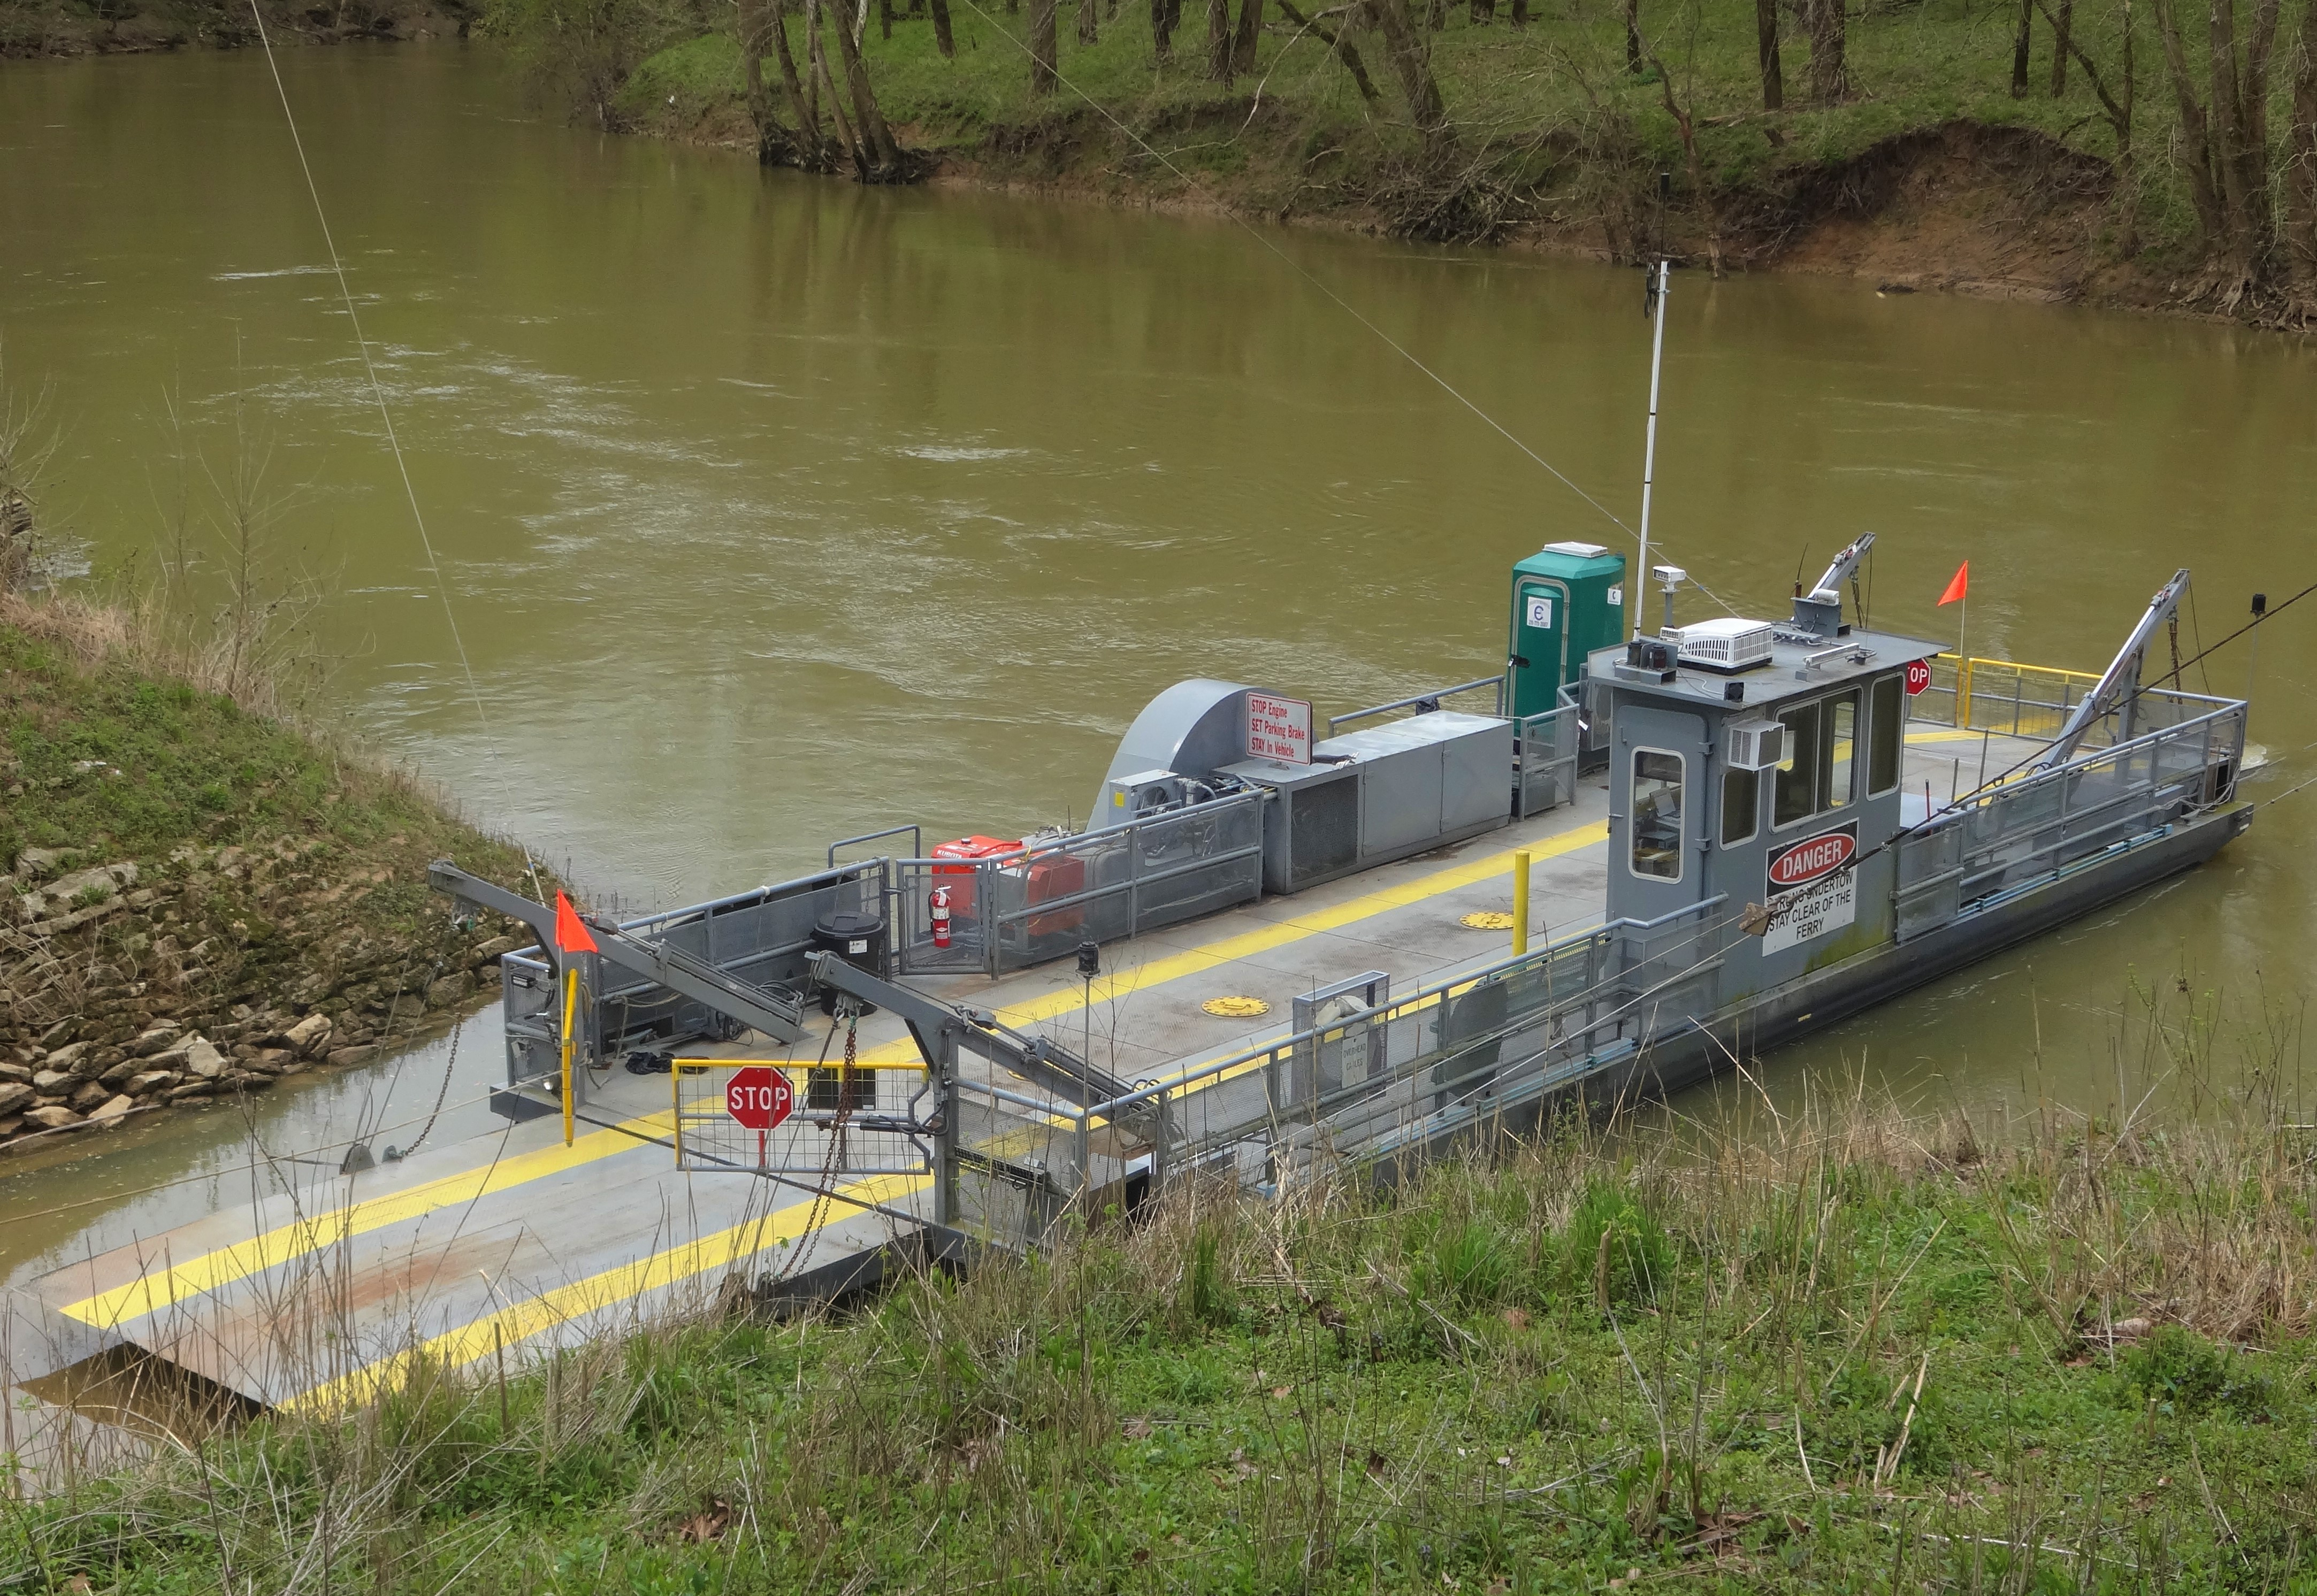 Green River ferryboat ferrying vehicles across the Green River